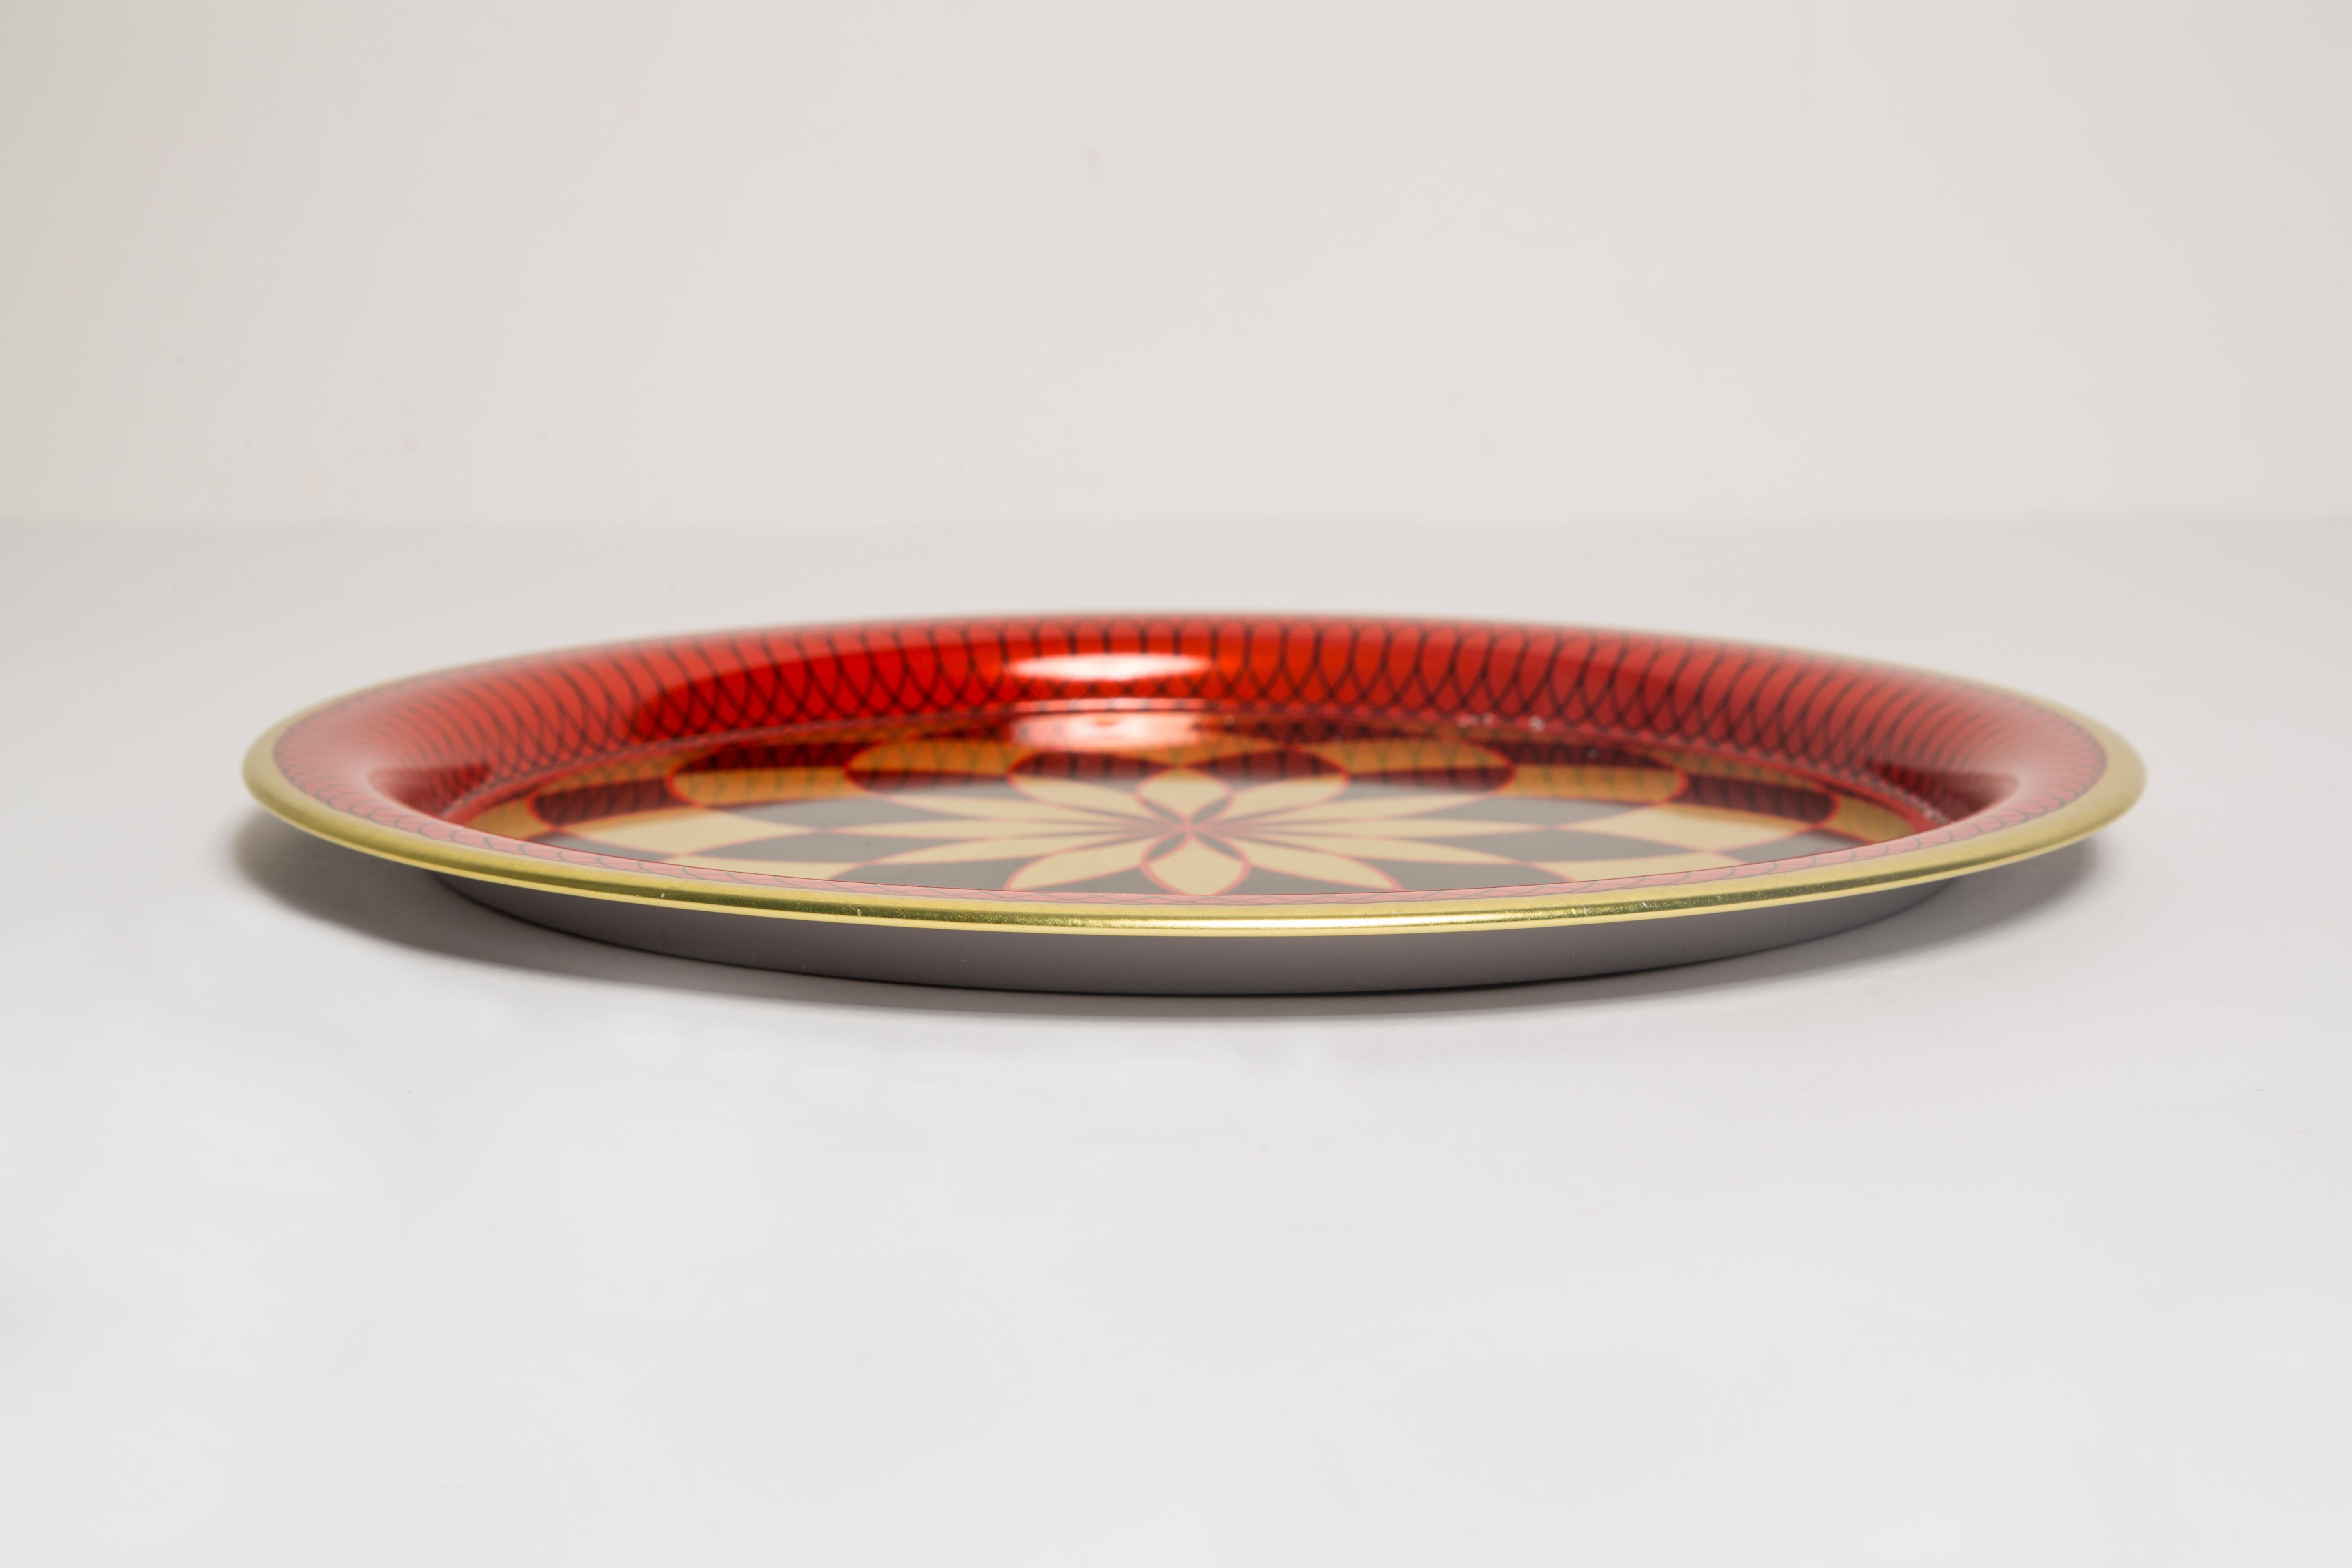 Midcentury Vintage Red Black and Gold Decorative Metal Plate, Poland, 1960s For Sale 3